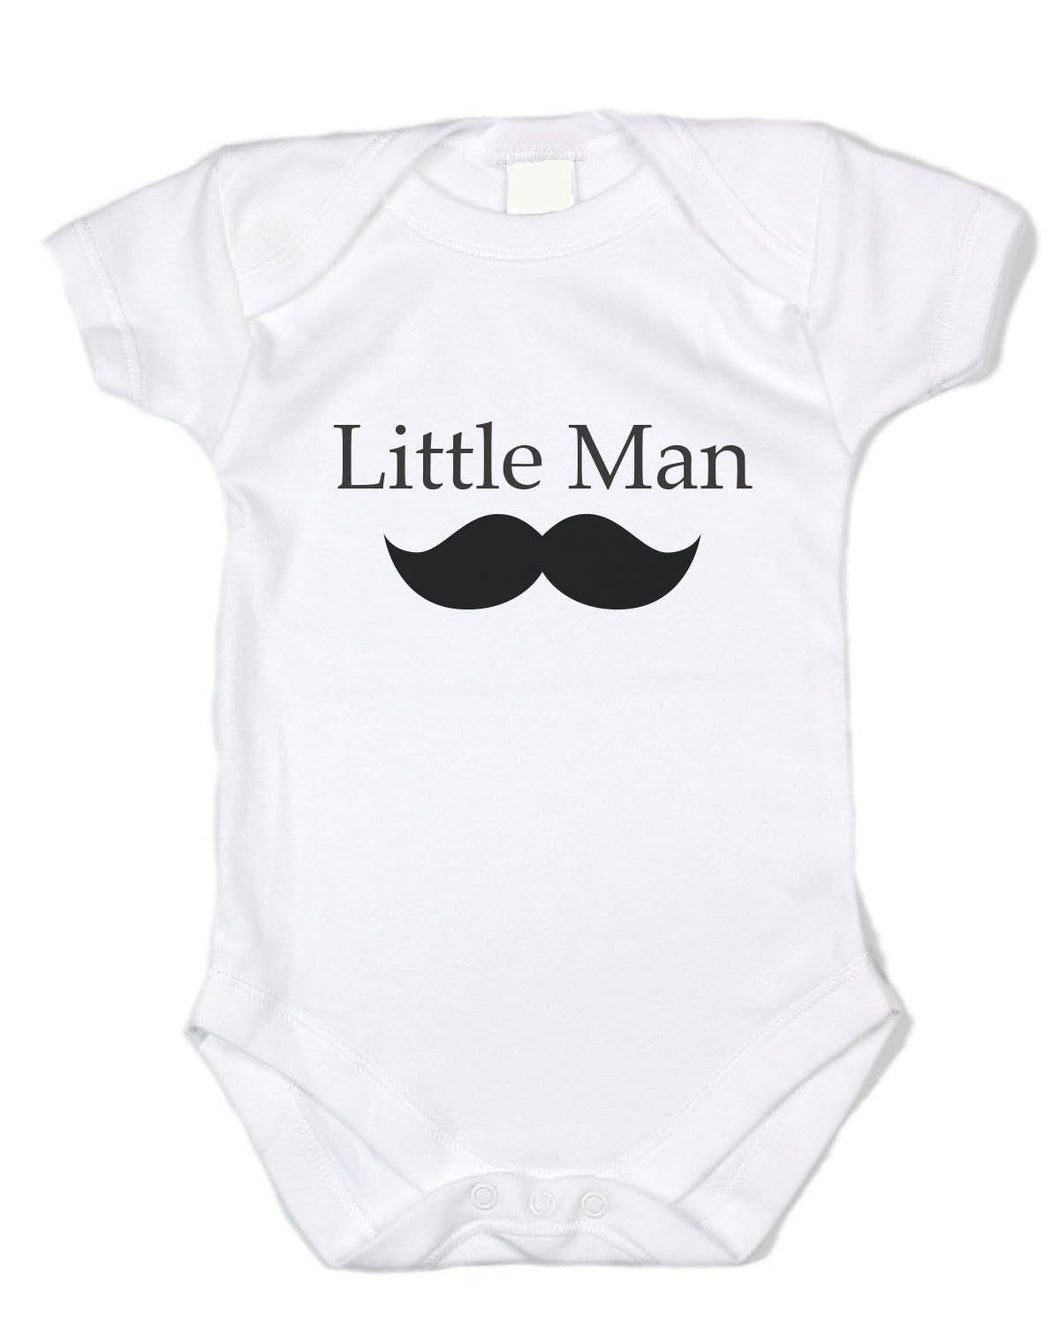 Funny Baby Clothes 